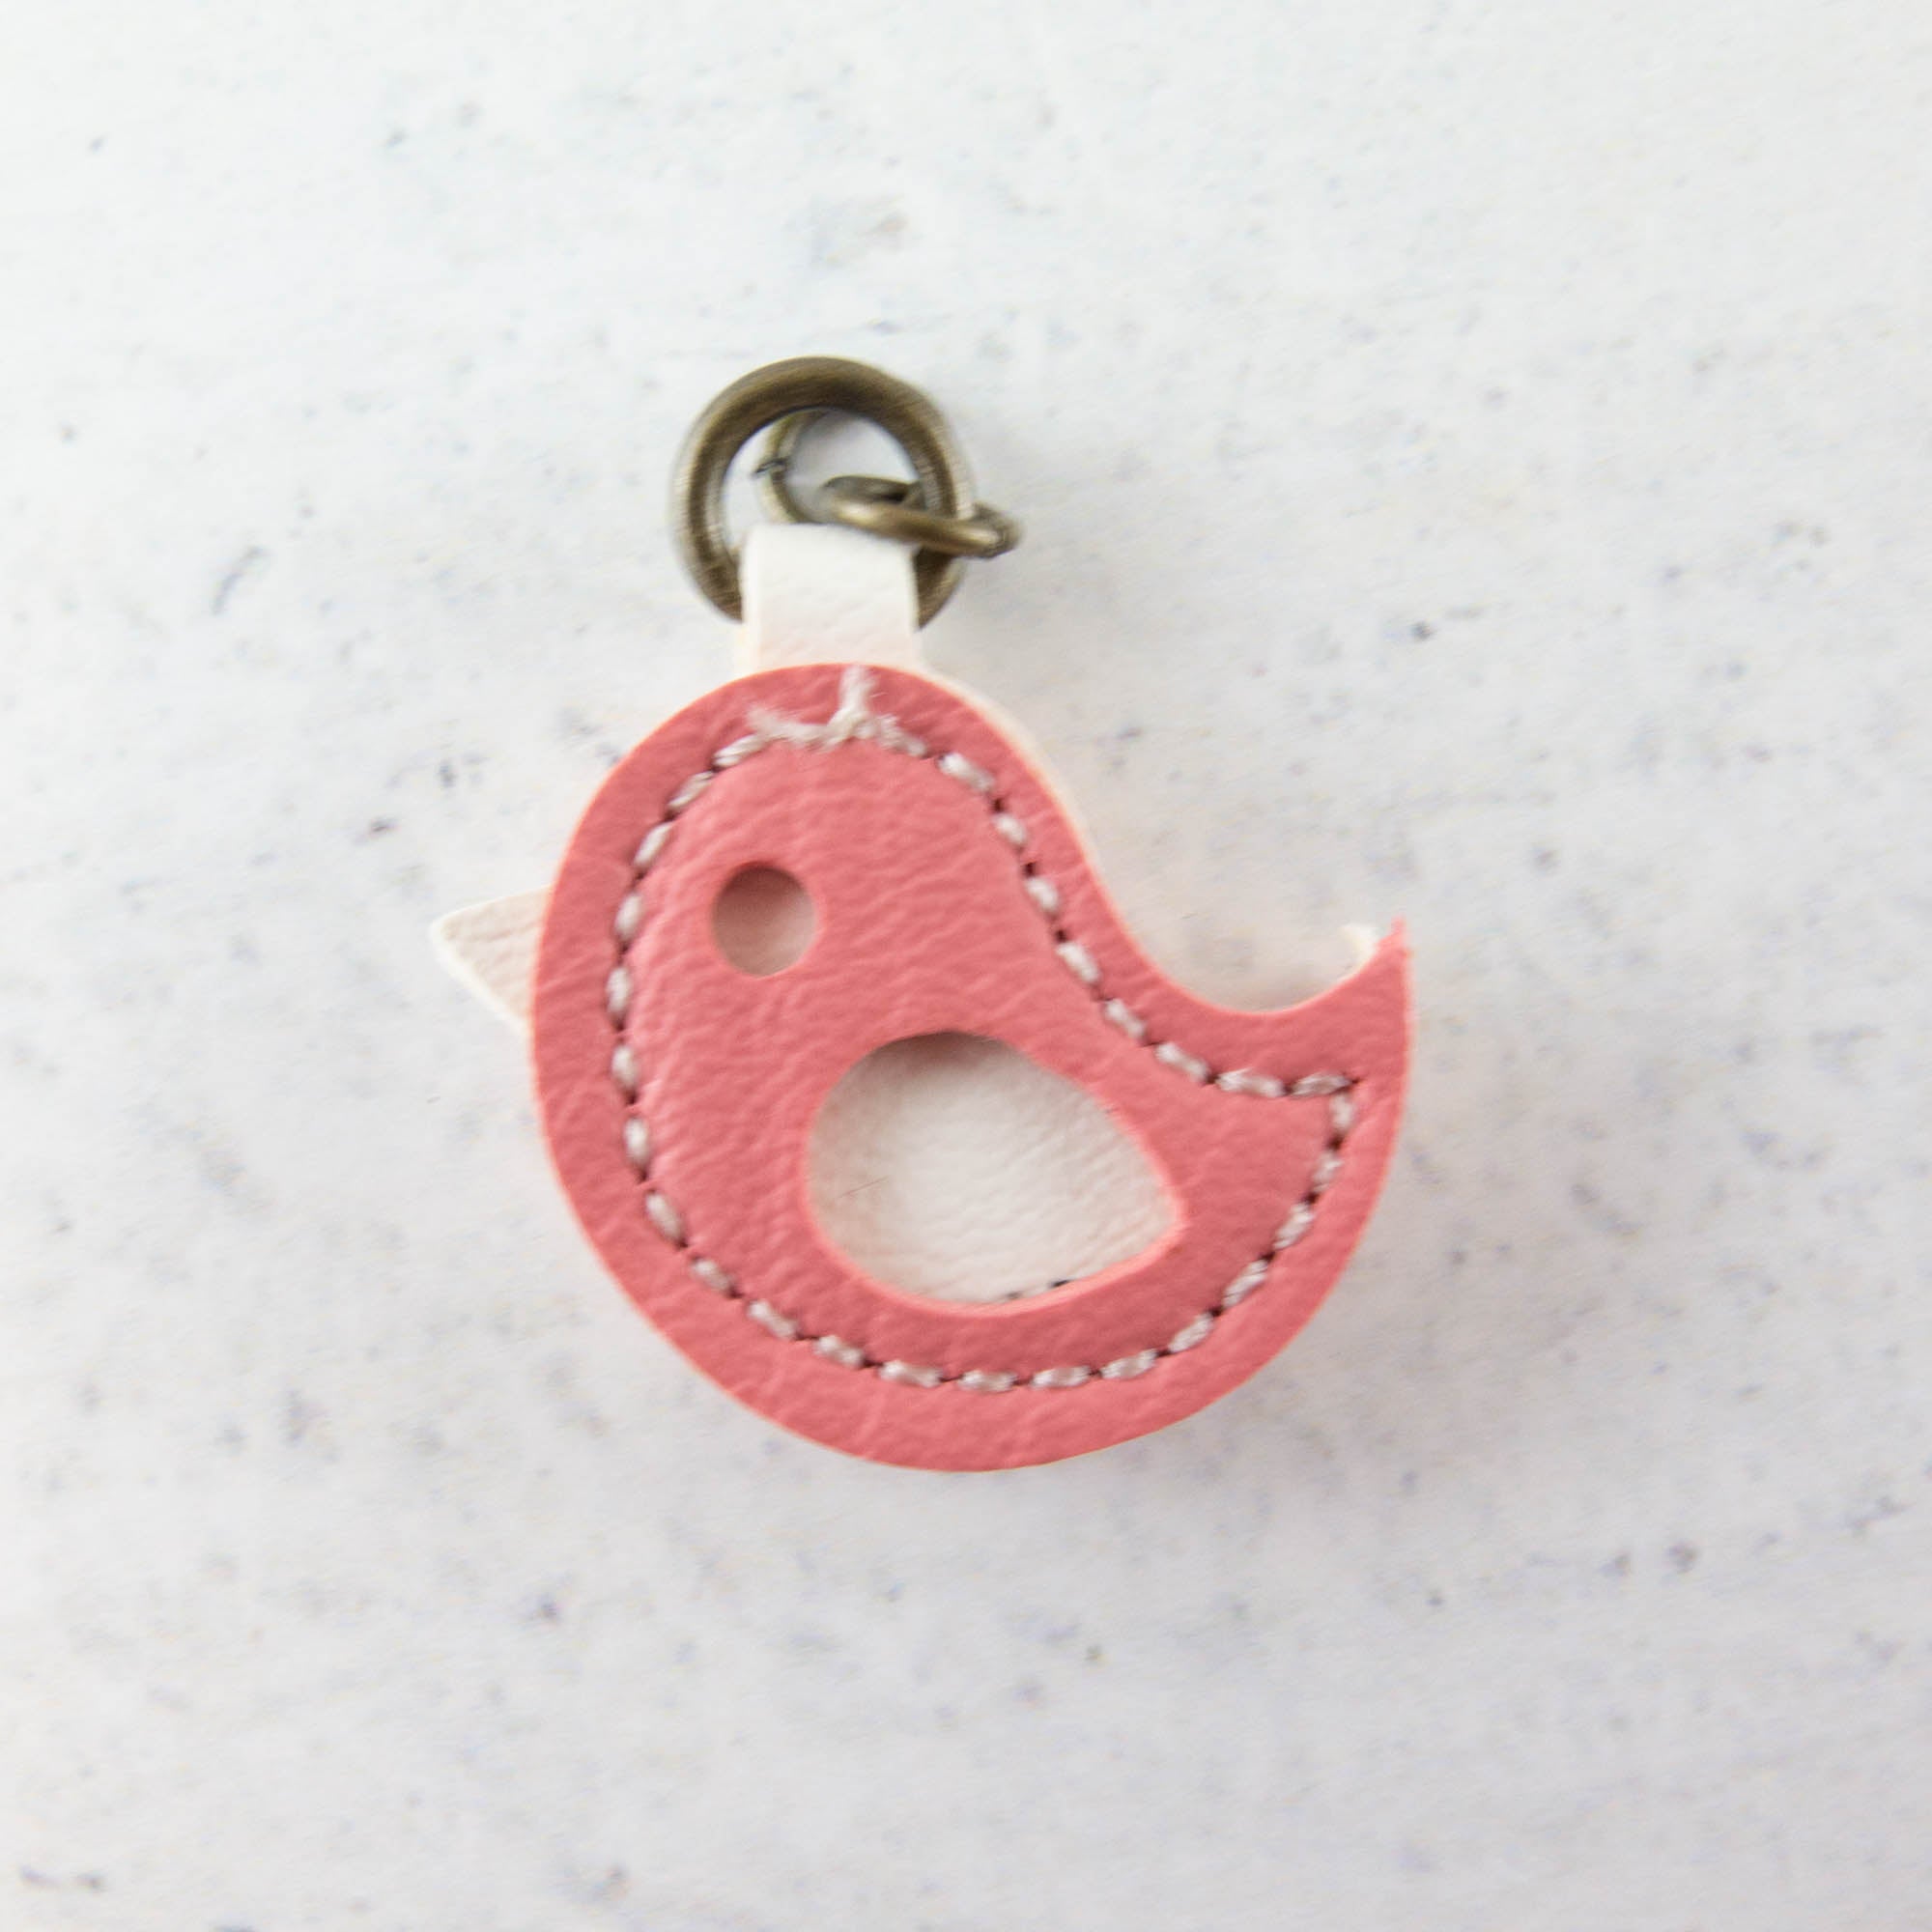 Synthetic Leather Zipper Pull - Little Bird